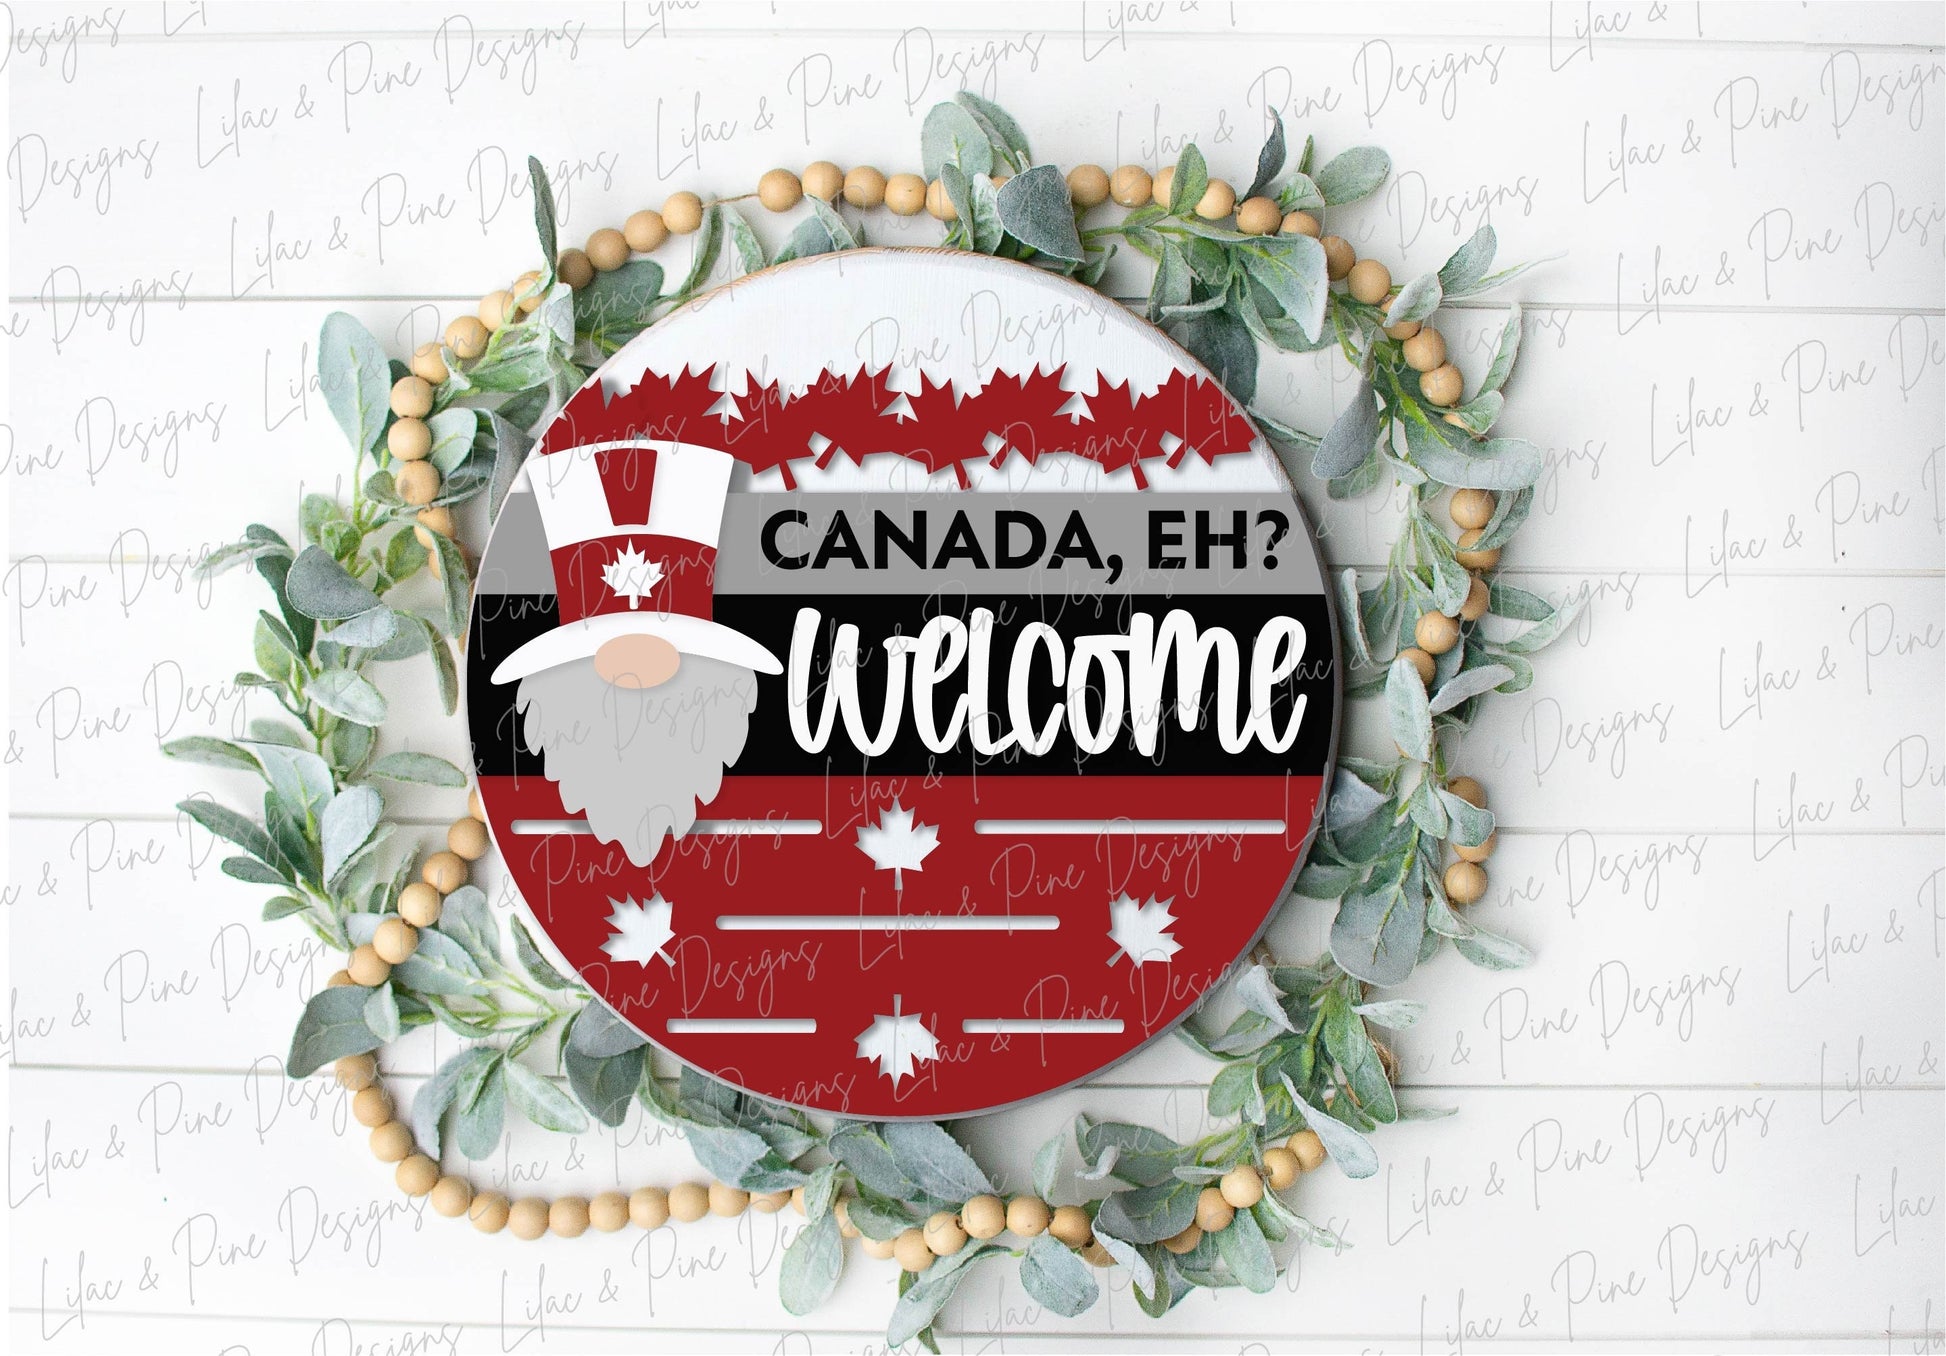 Canada Gnome Welcome sign SVG, Canada Day door hanger SVG, Canadian Gnome svg, porch sign svg, Glowforge SVG file, laser cut file